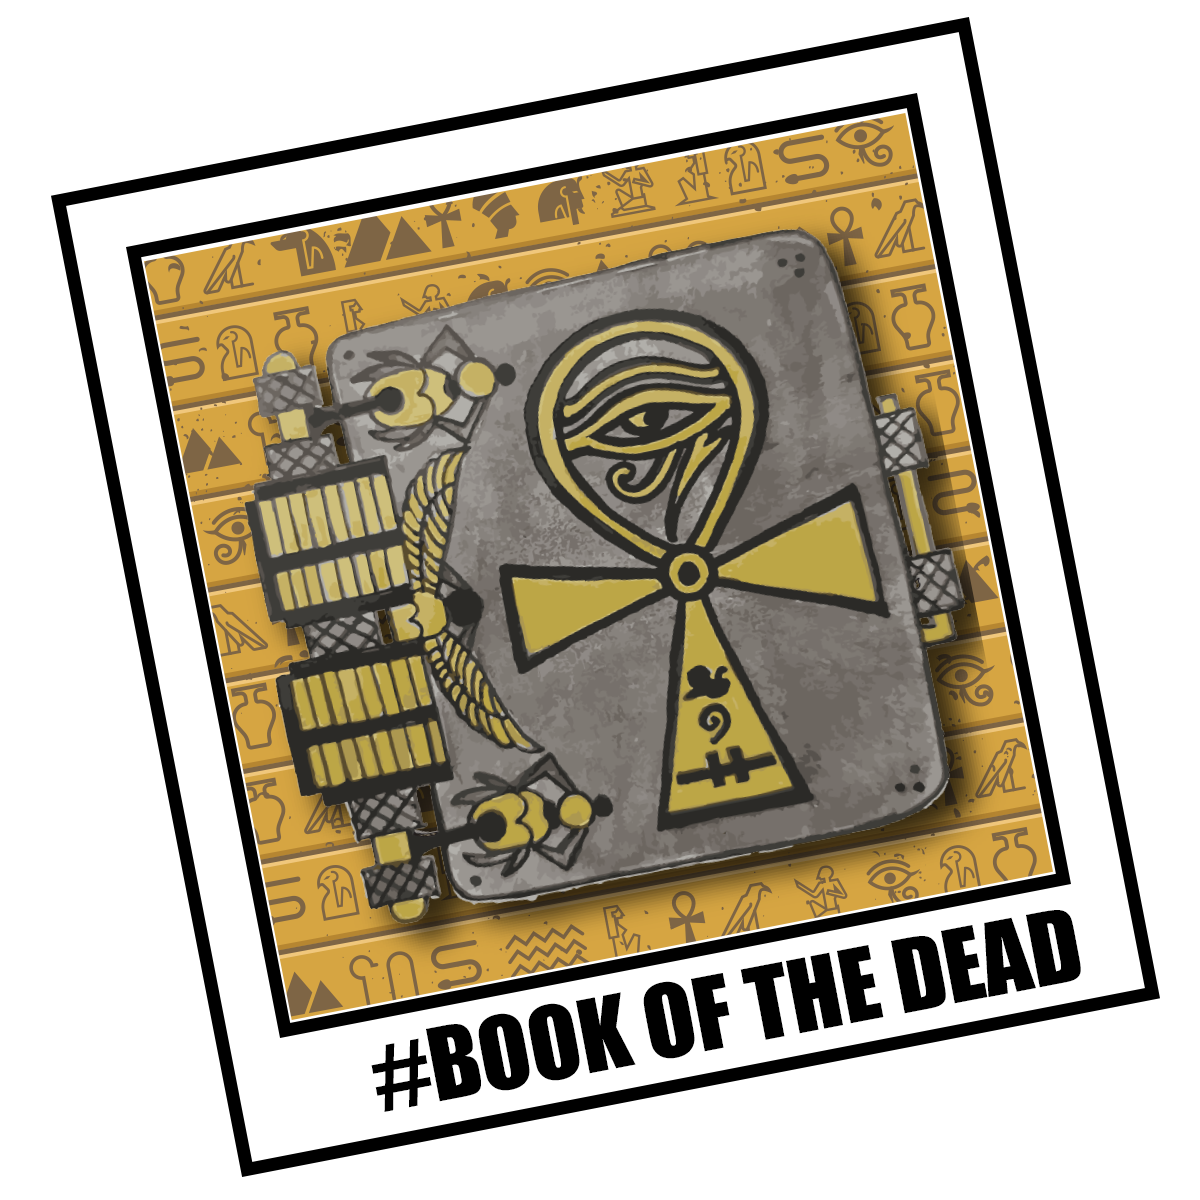 The Book of the Dead: A guide for the departed souls